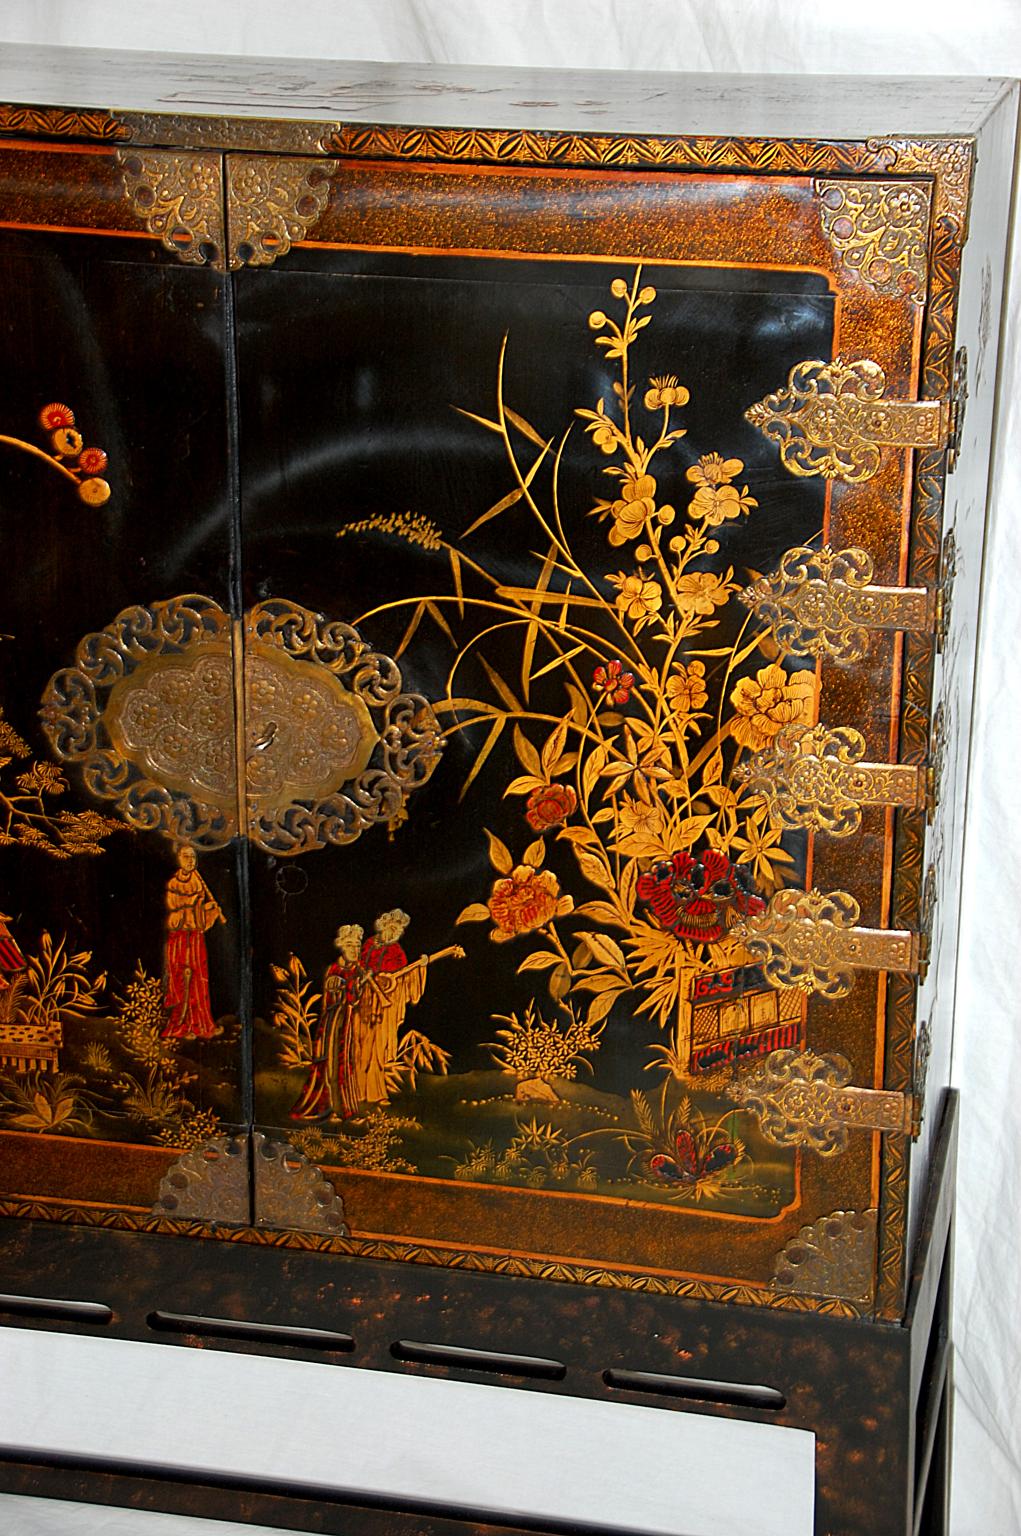 English 19th century black lacquered and hand painted japanned cabinet on custom made stand. This 36 inch wide cabinet has its original naturalistic hand painted decoration in gold and red on black ground and fabulous hand engraved brass hinges and